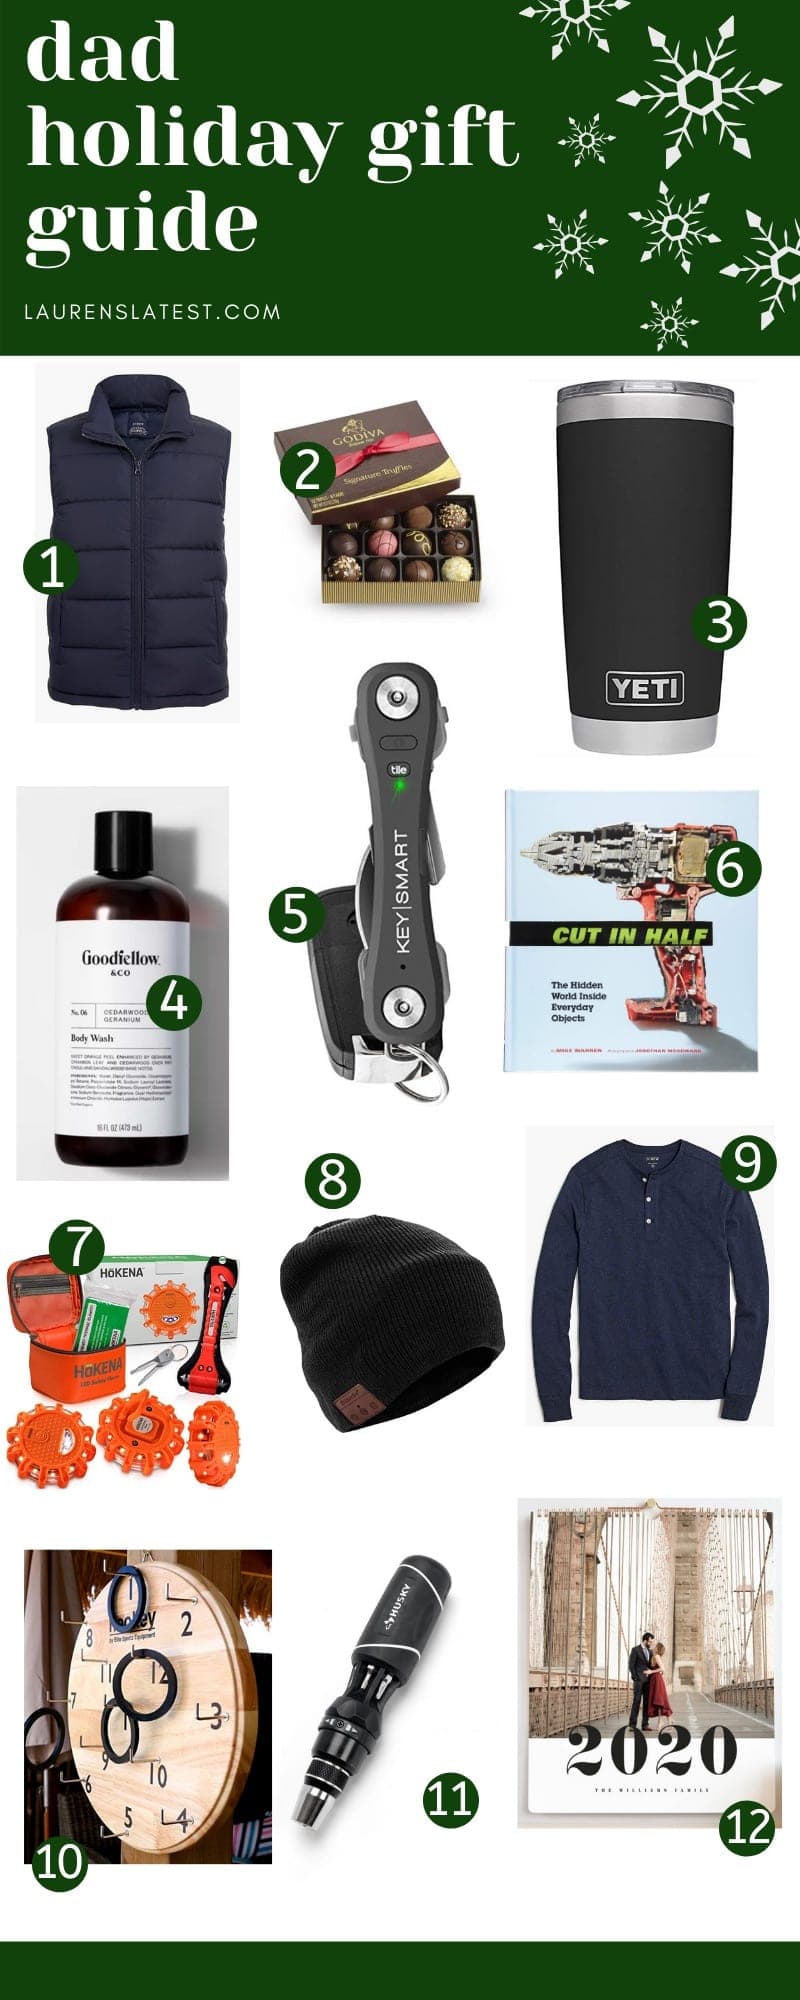 Holiday gift guide with various items